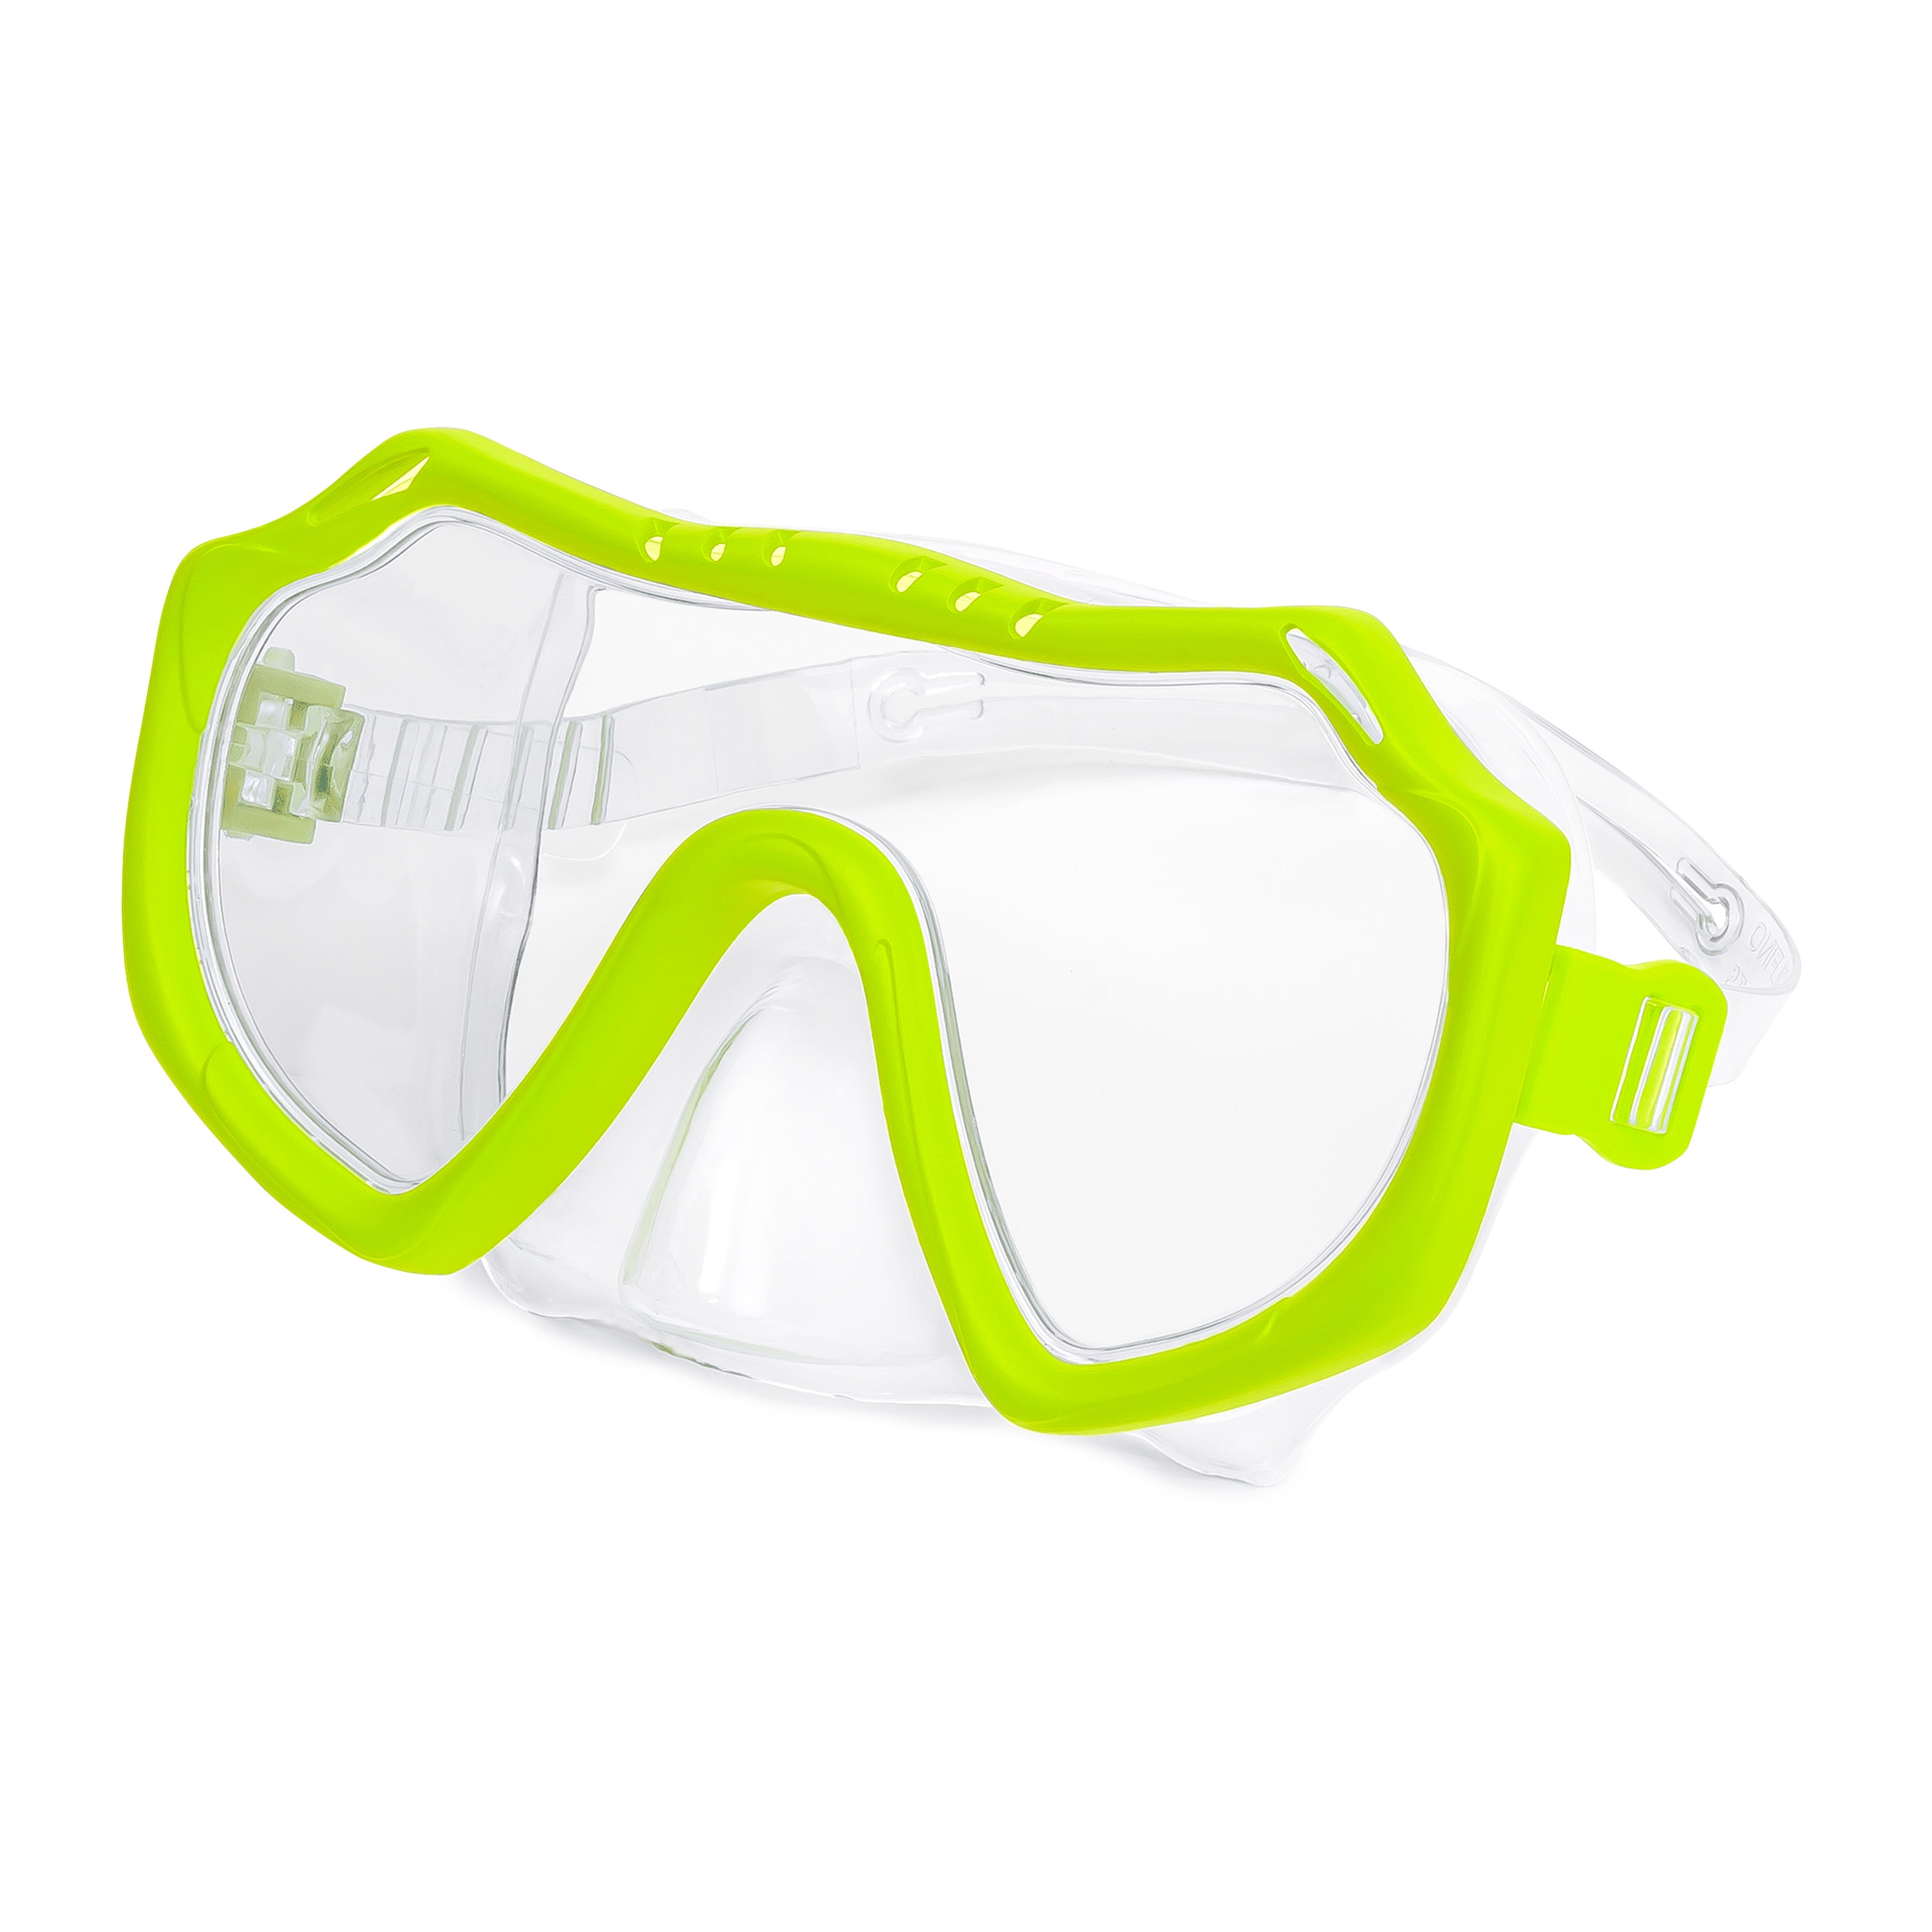 Dolfino Youth Swim Mask, Wide Angle View Adjustable Goggles, Ages 6 and up